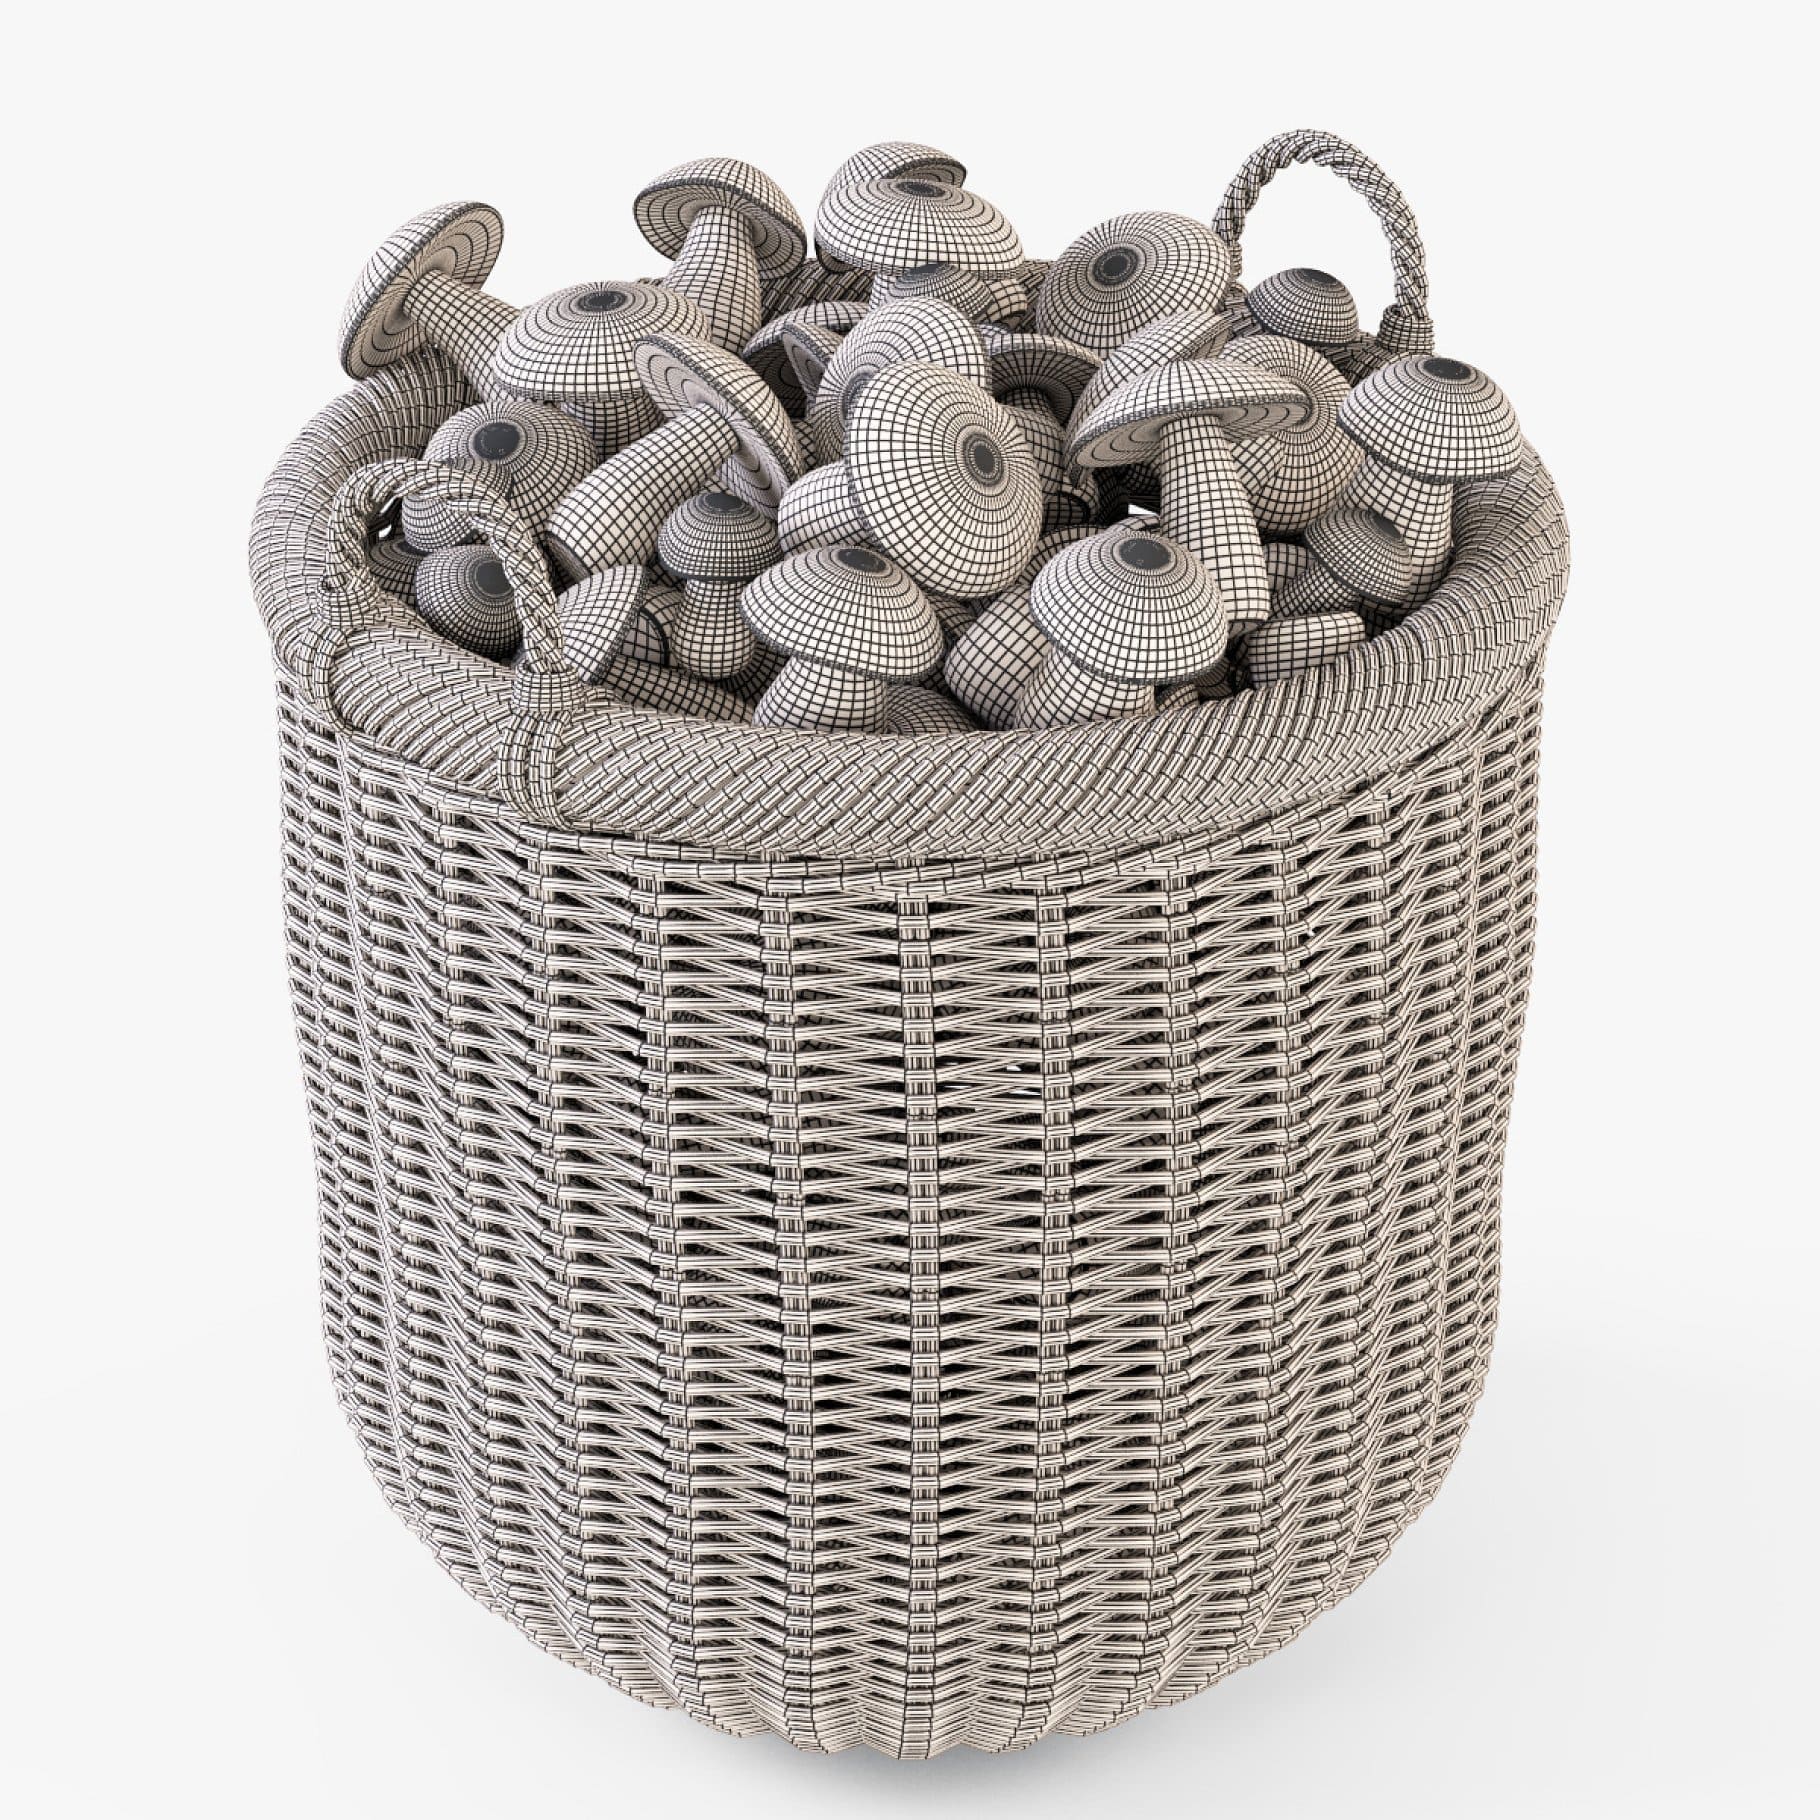 The basket is made of vines with small handles.